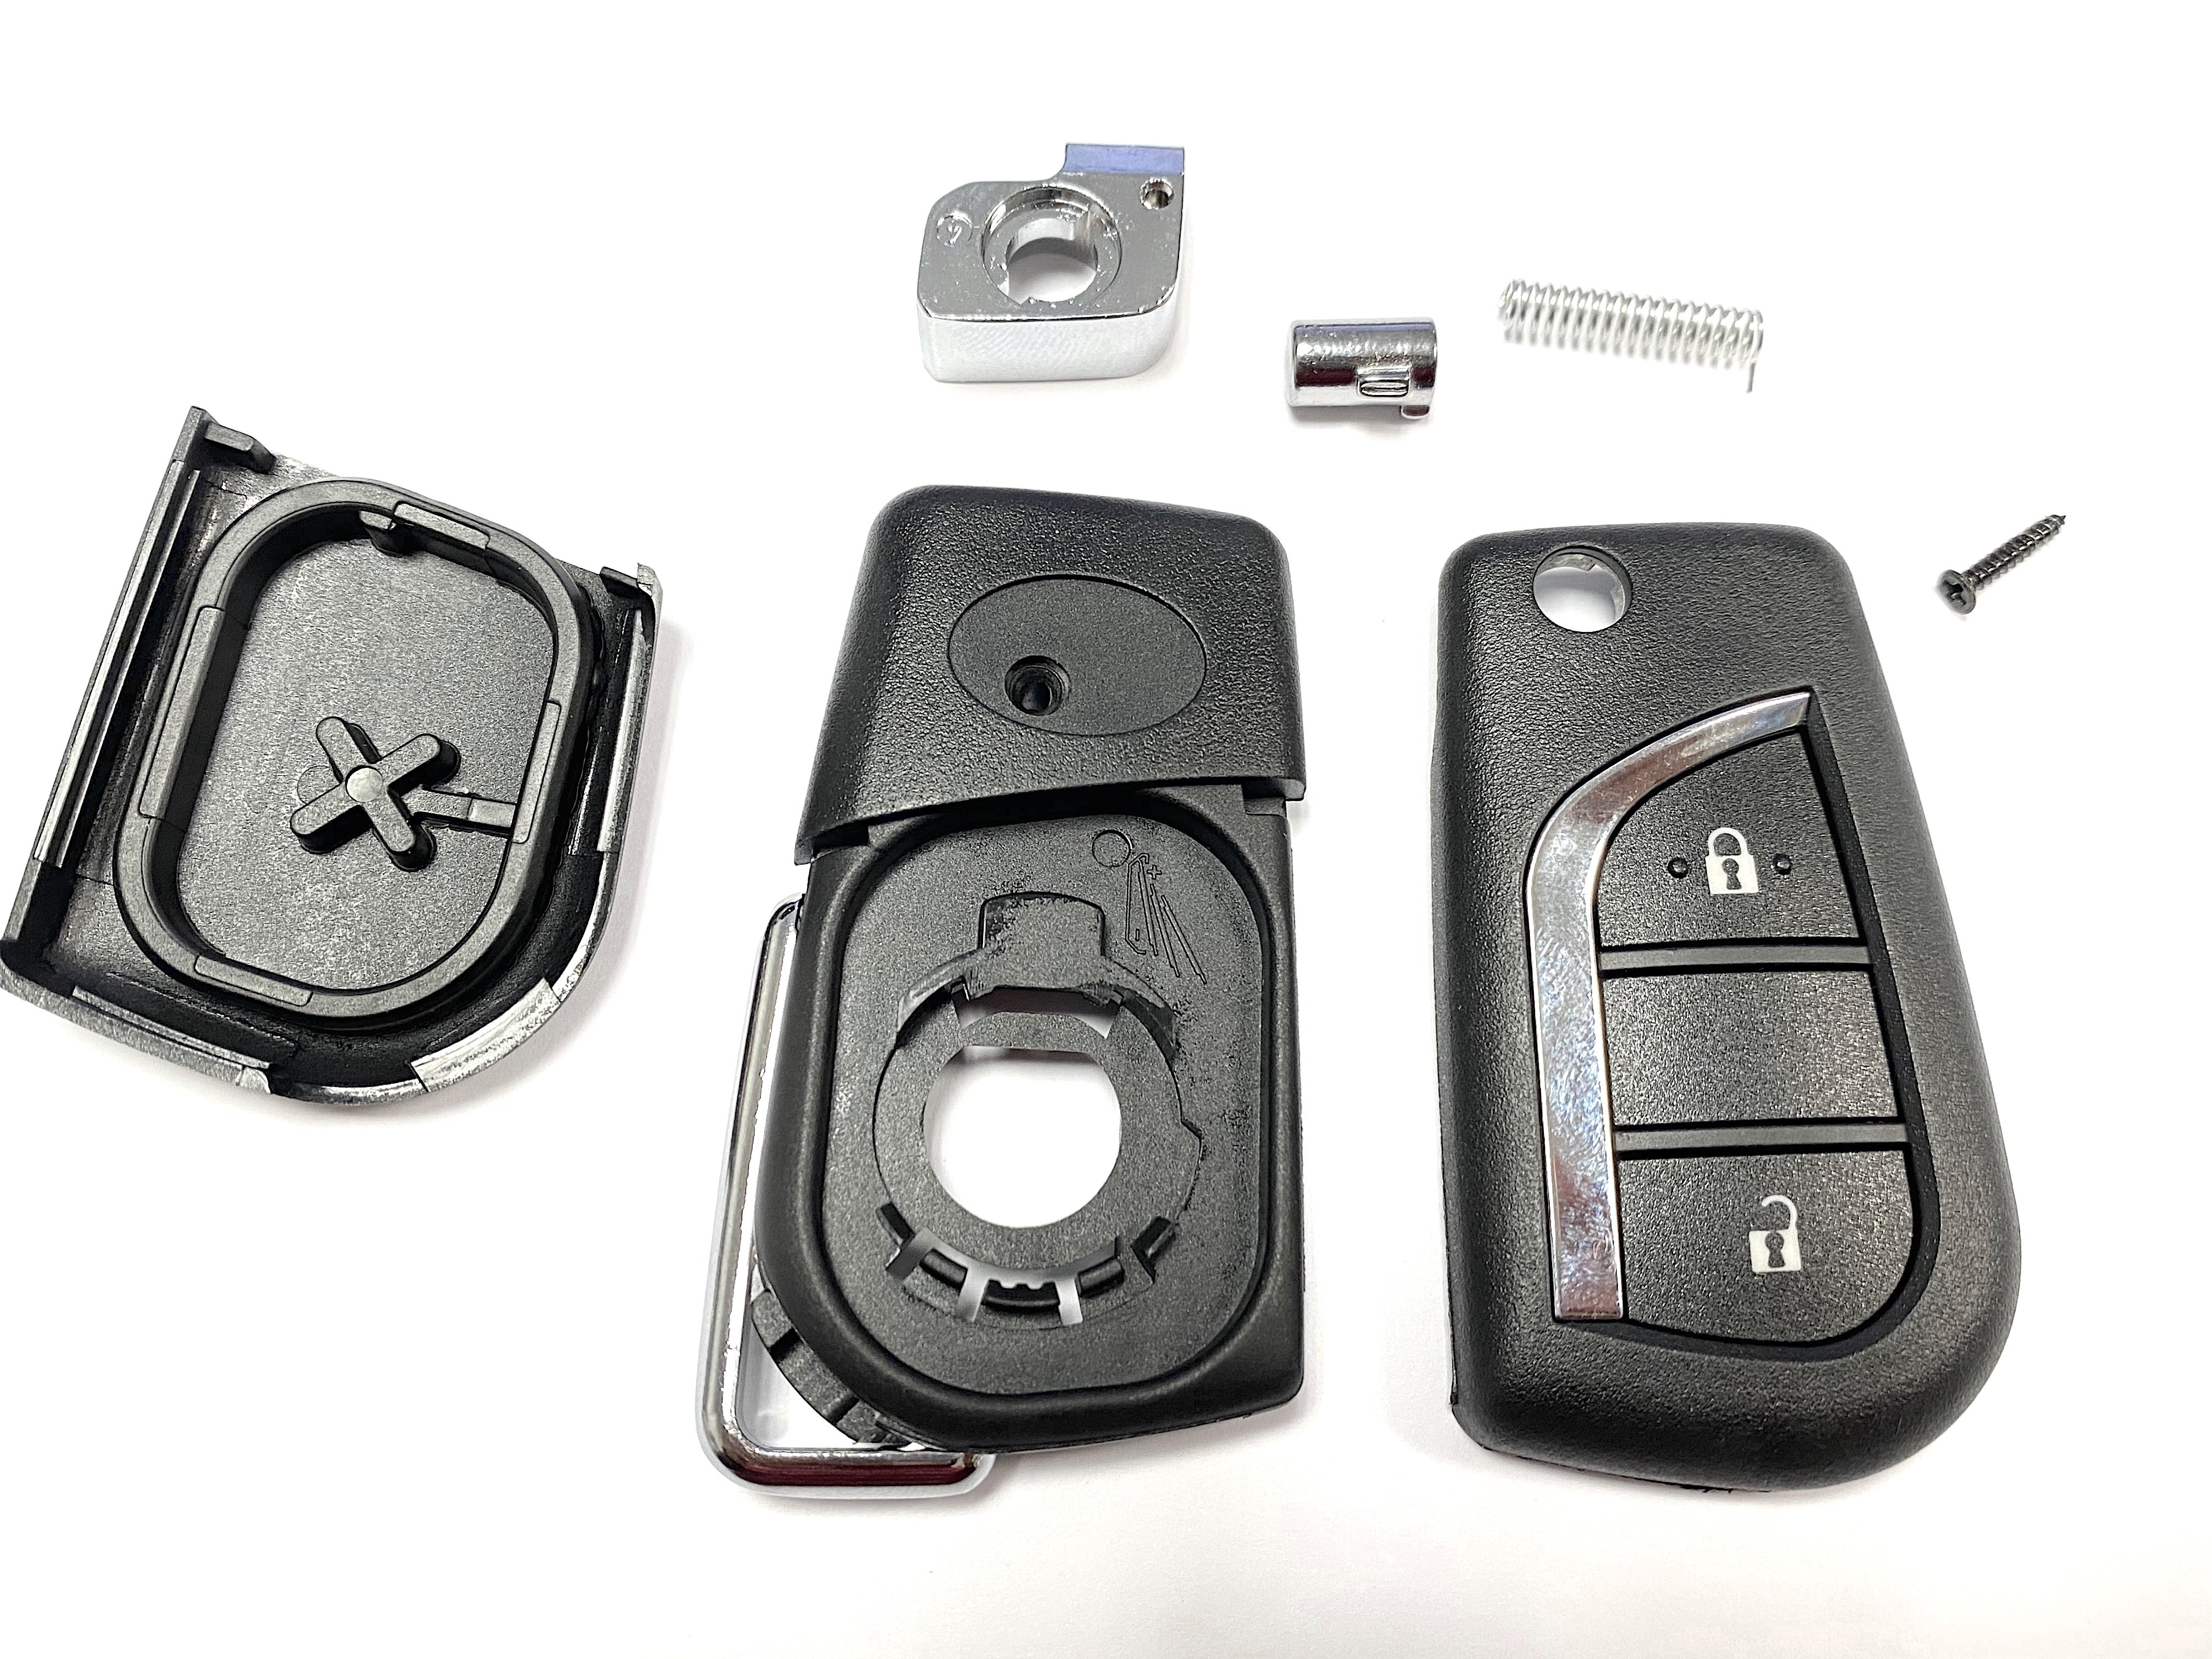 RFC 2 button case for Toyota Aygo remote key fob 2005 - 2014